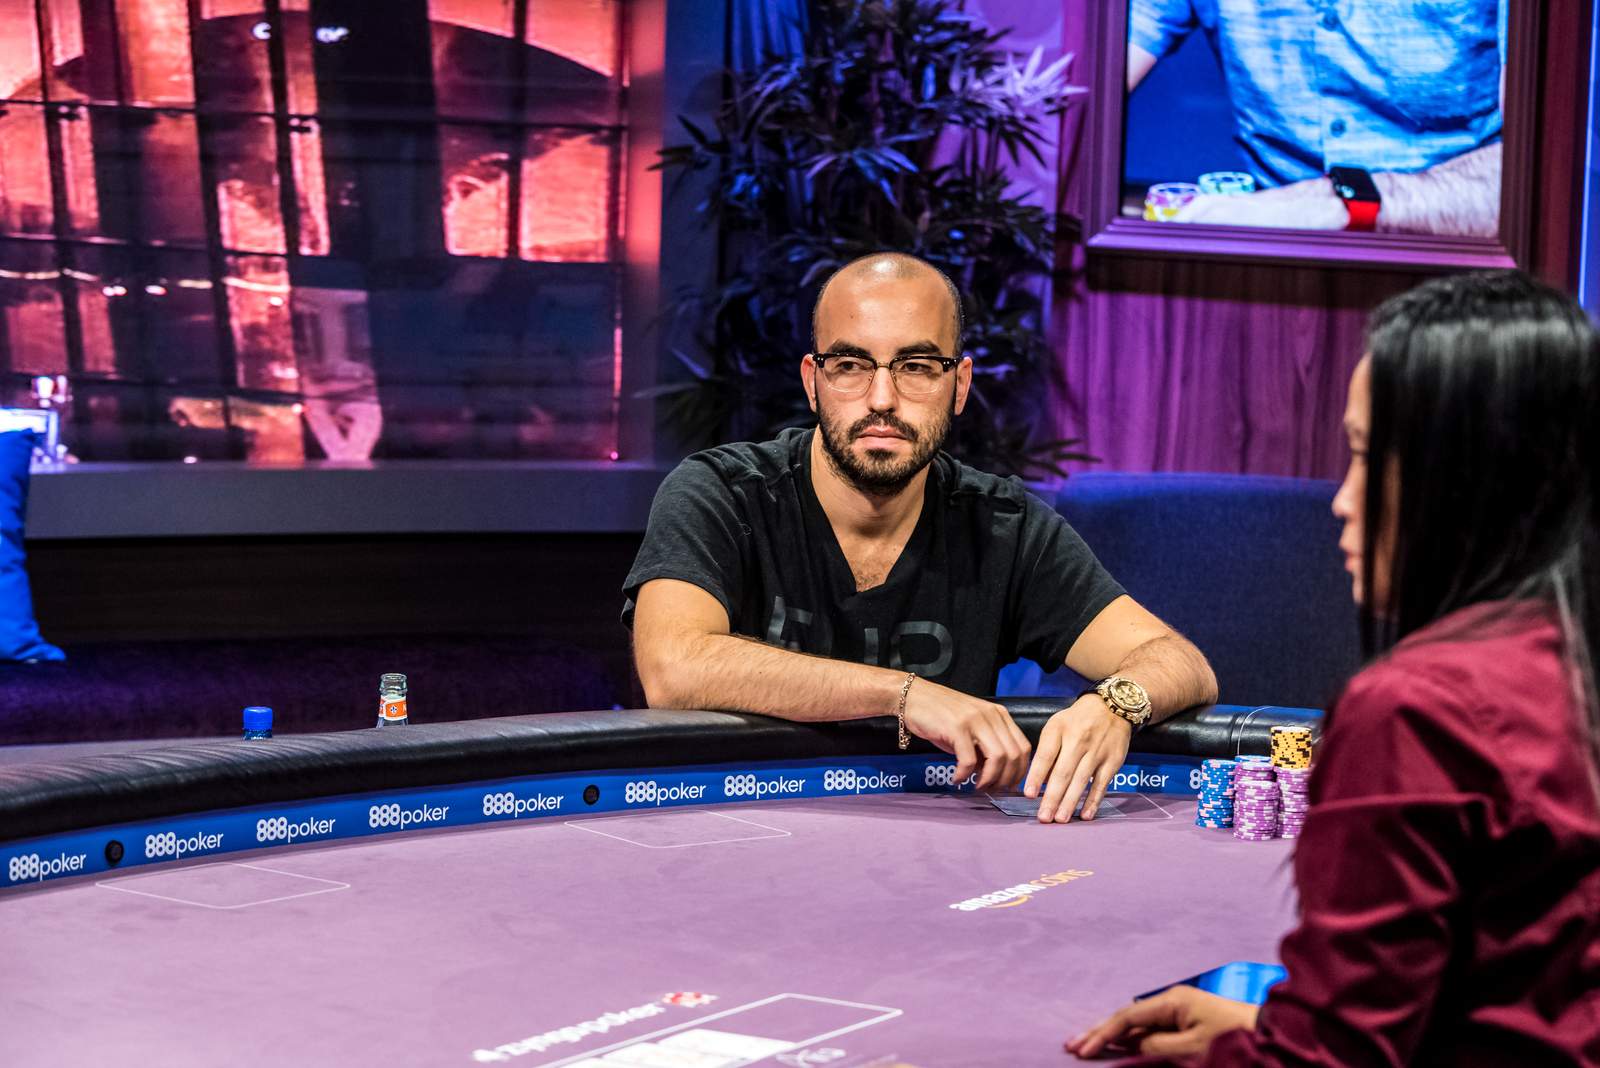 U.S. Poker Open Preview: The Contenders